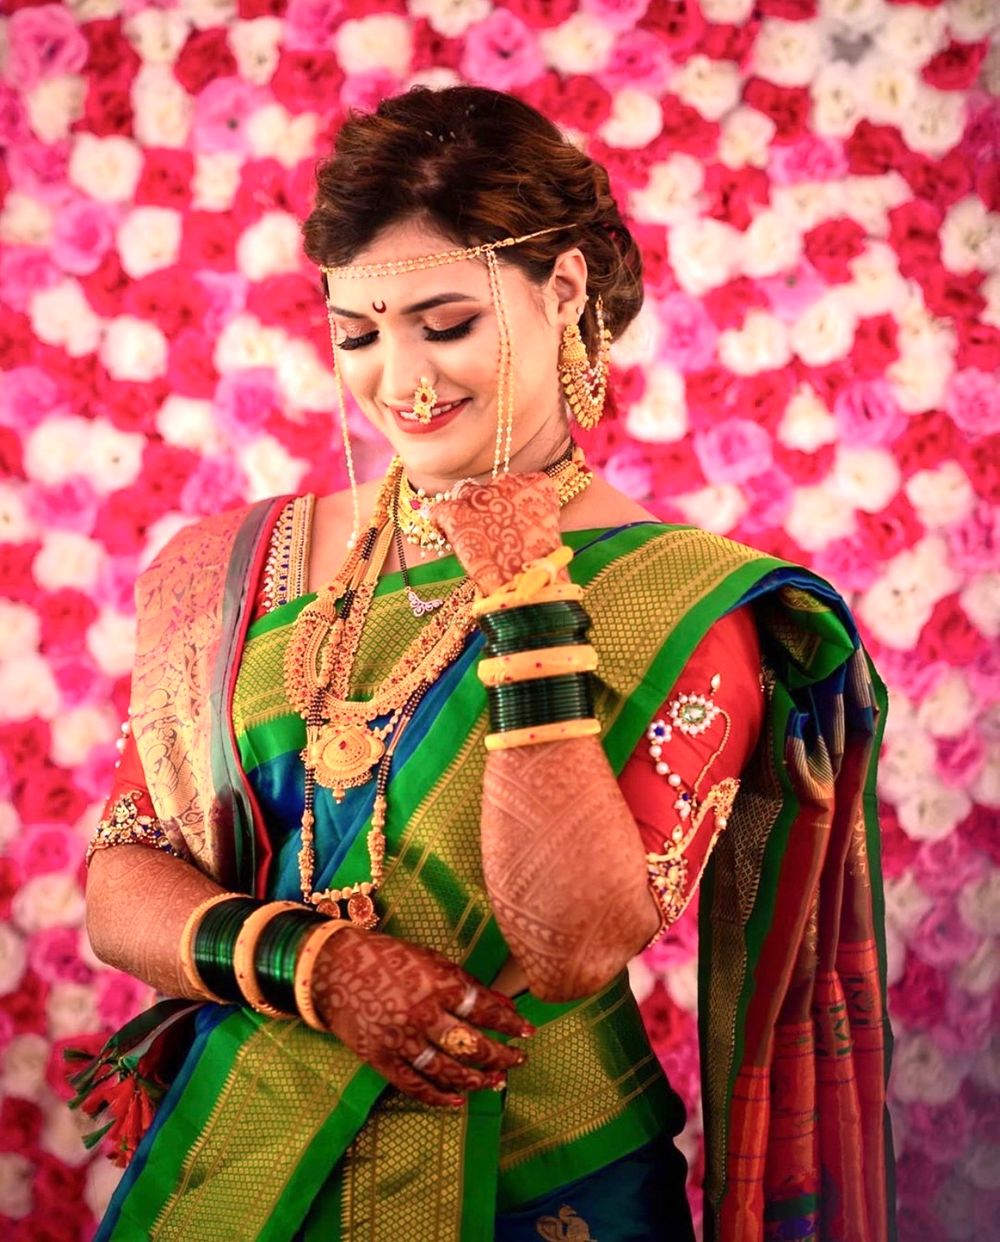 Photo By Makeover by Shachi Singh - Bridal Makeup